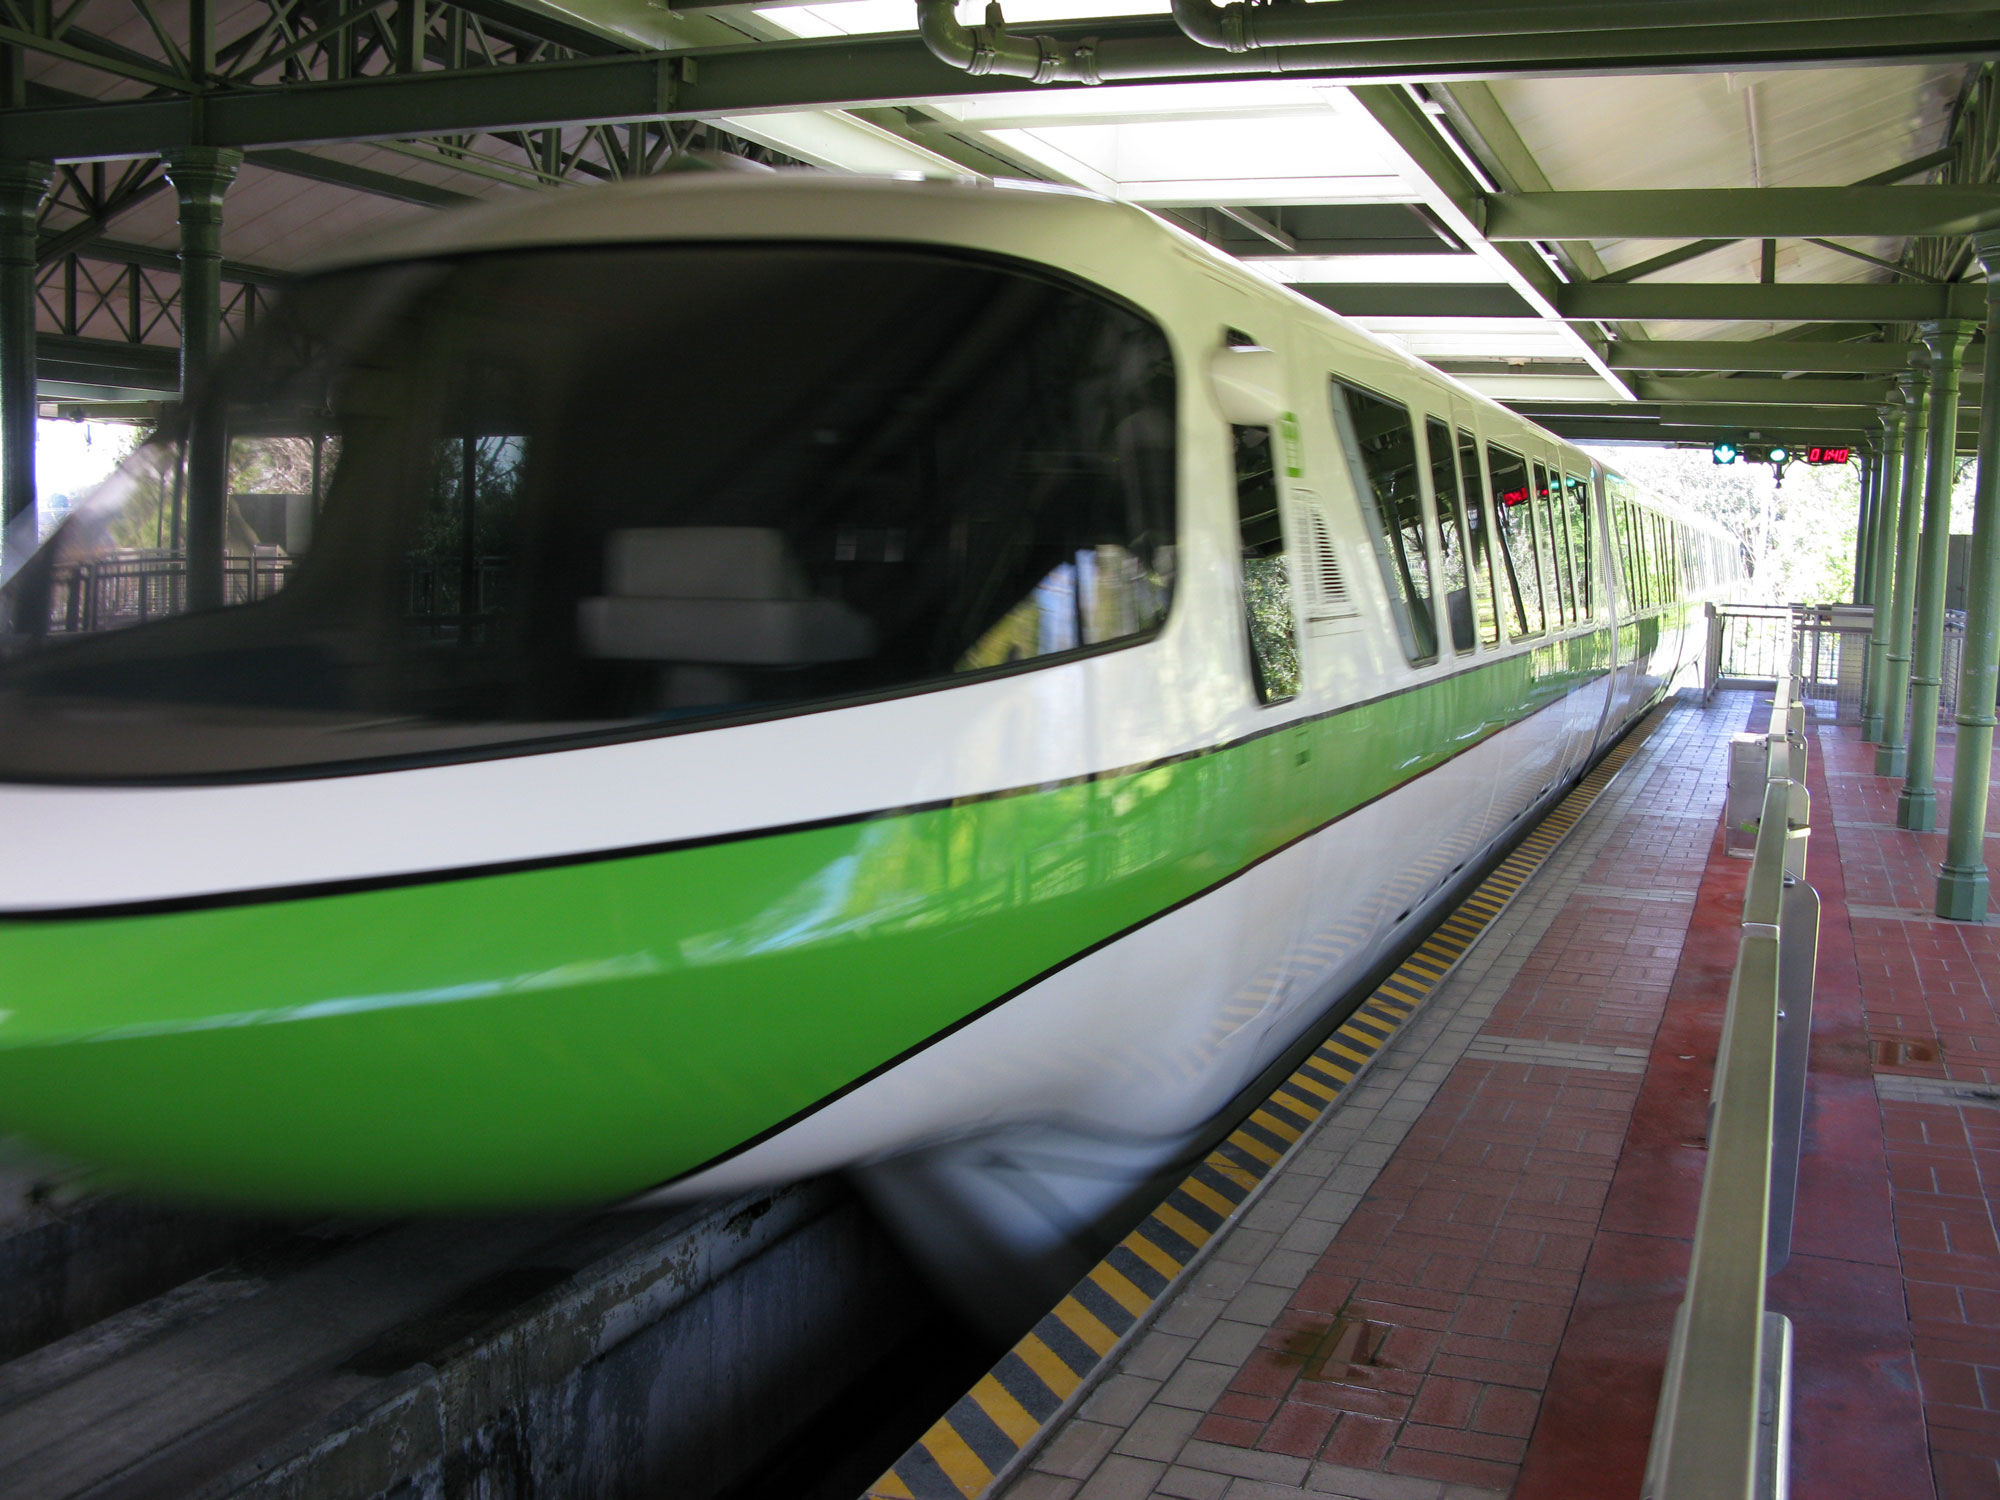 Green monorail arrives